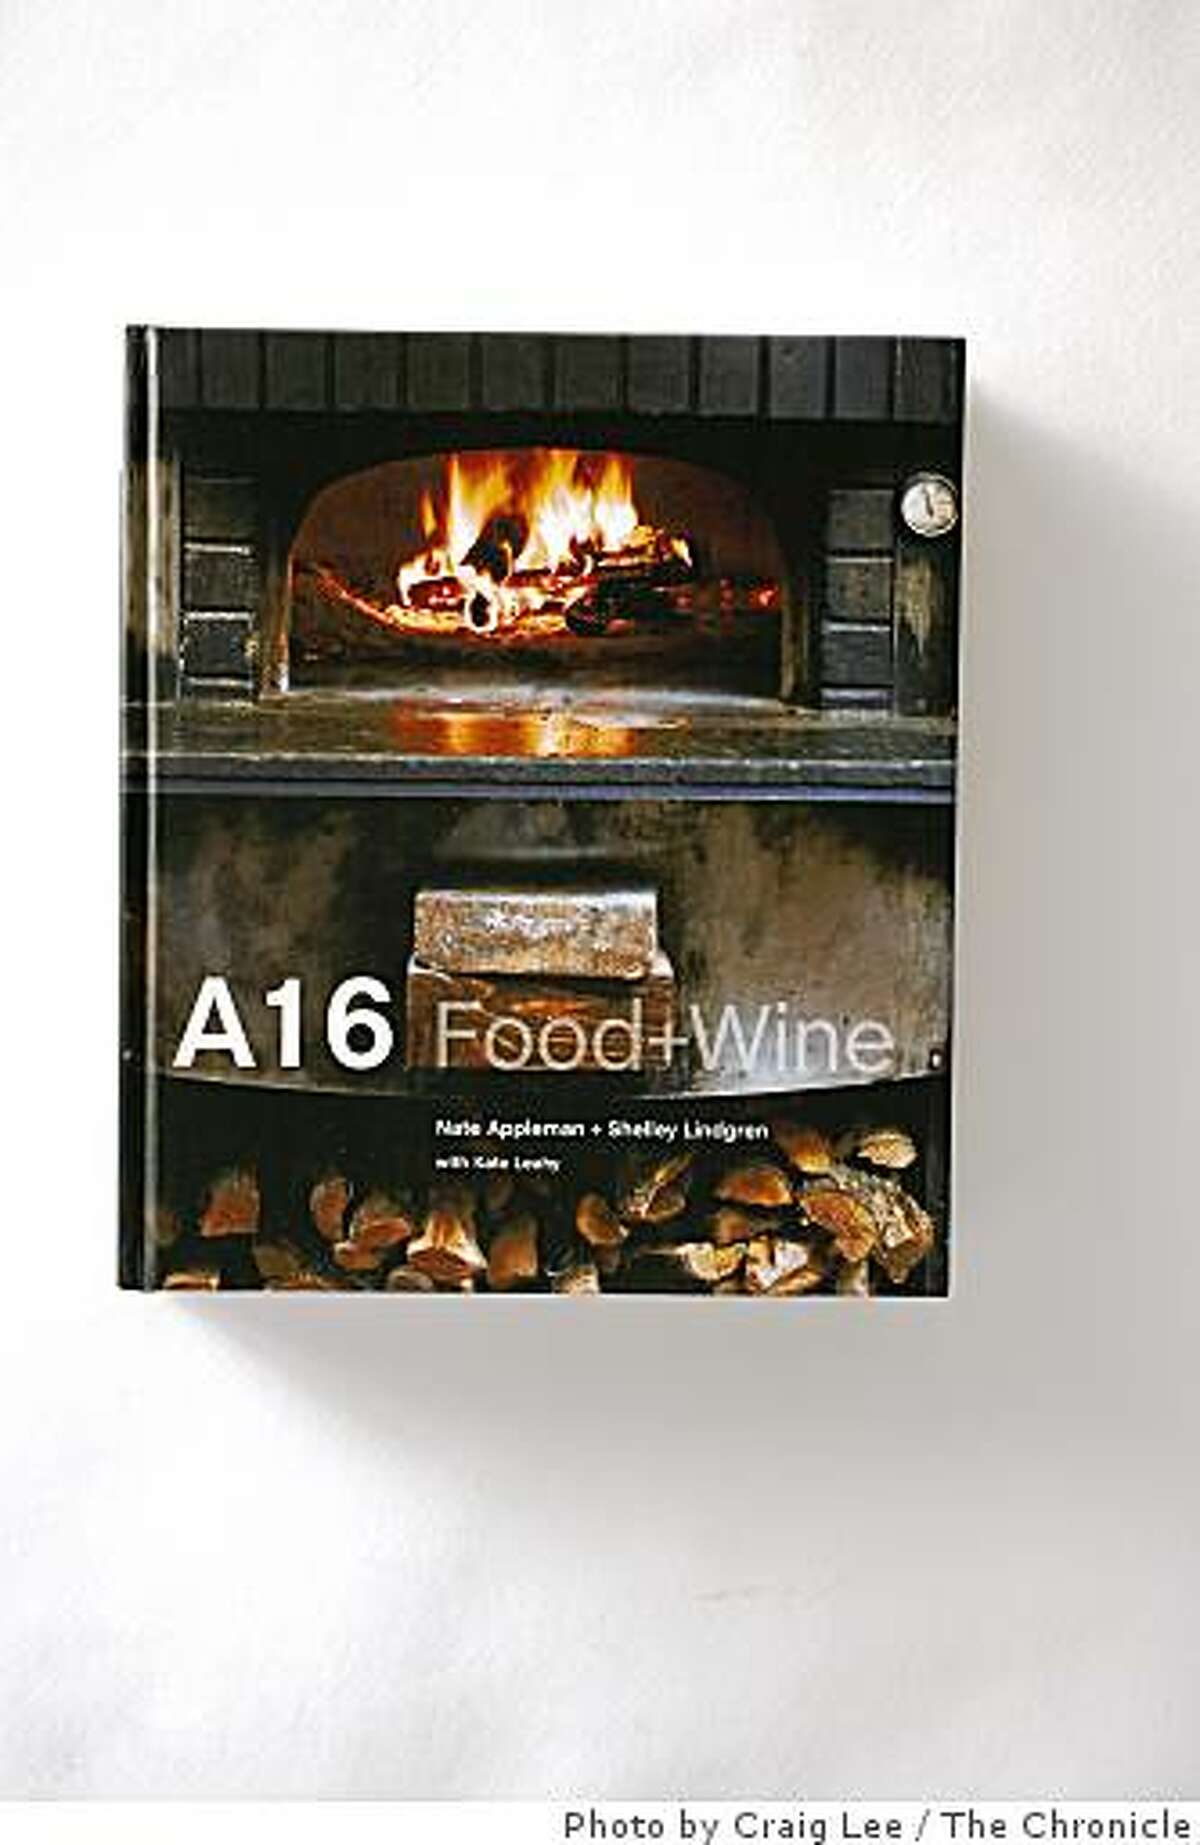 A16 Food and Wine by Nate Appleman and Shelley Lindgren in San Francisco, Calif. on August 1, 2008. Photo by Craig Lee / The Chronicle